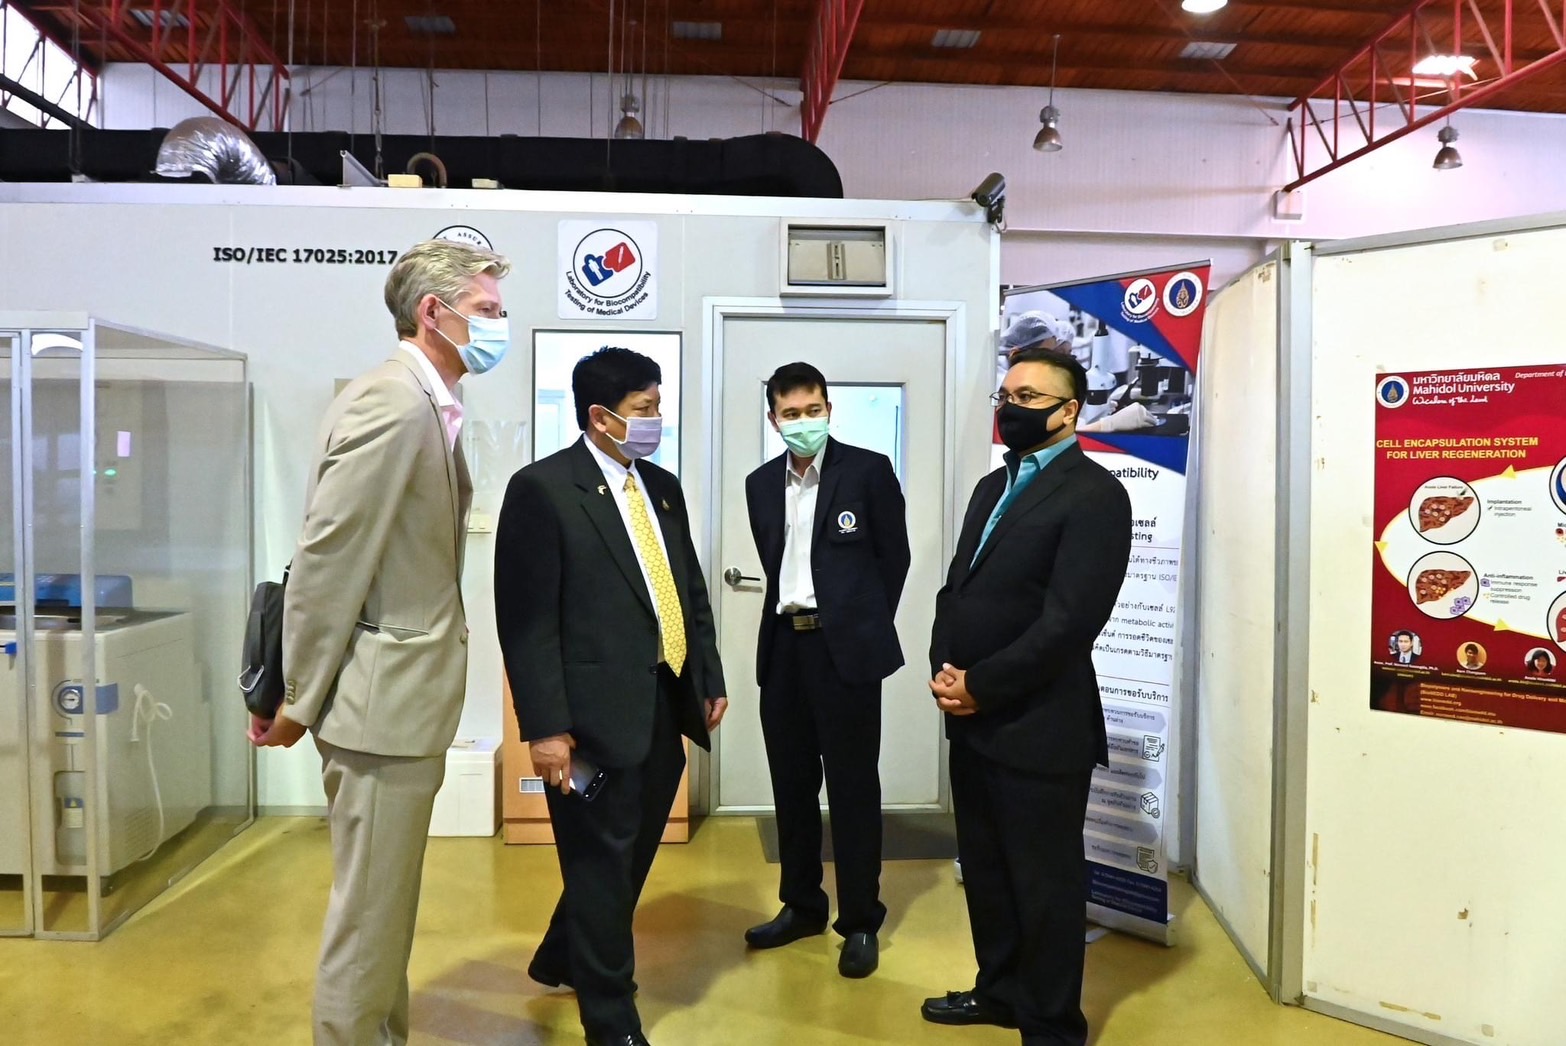 Men in suits discussed in front of a clean room